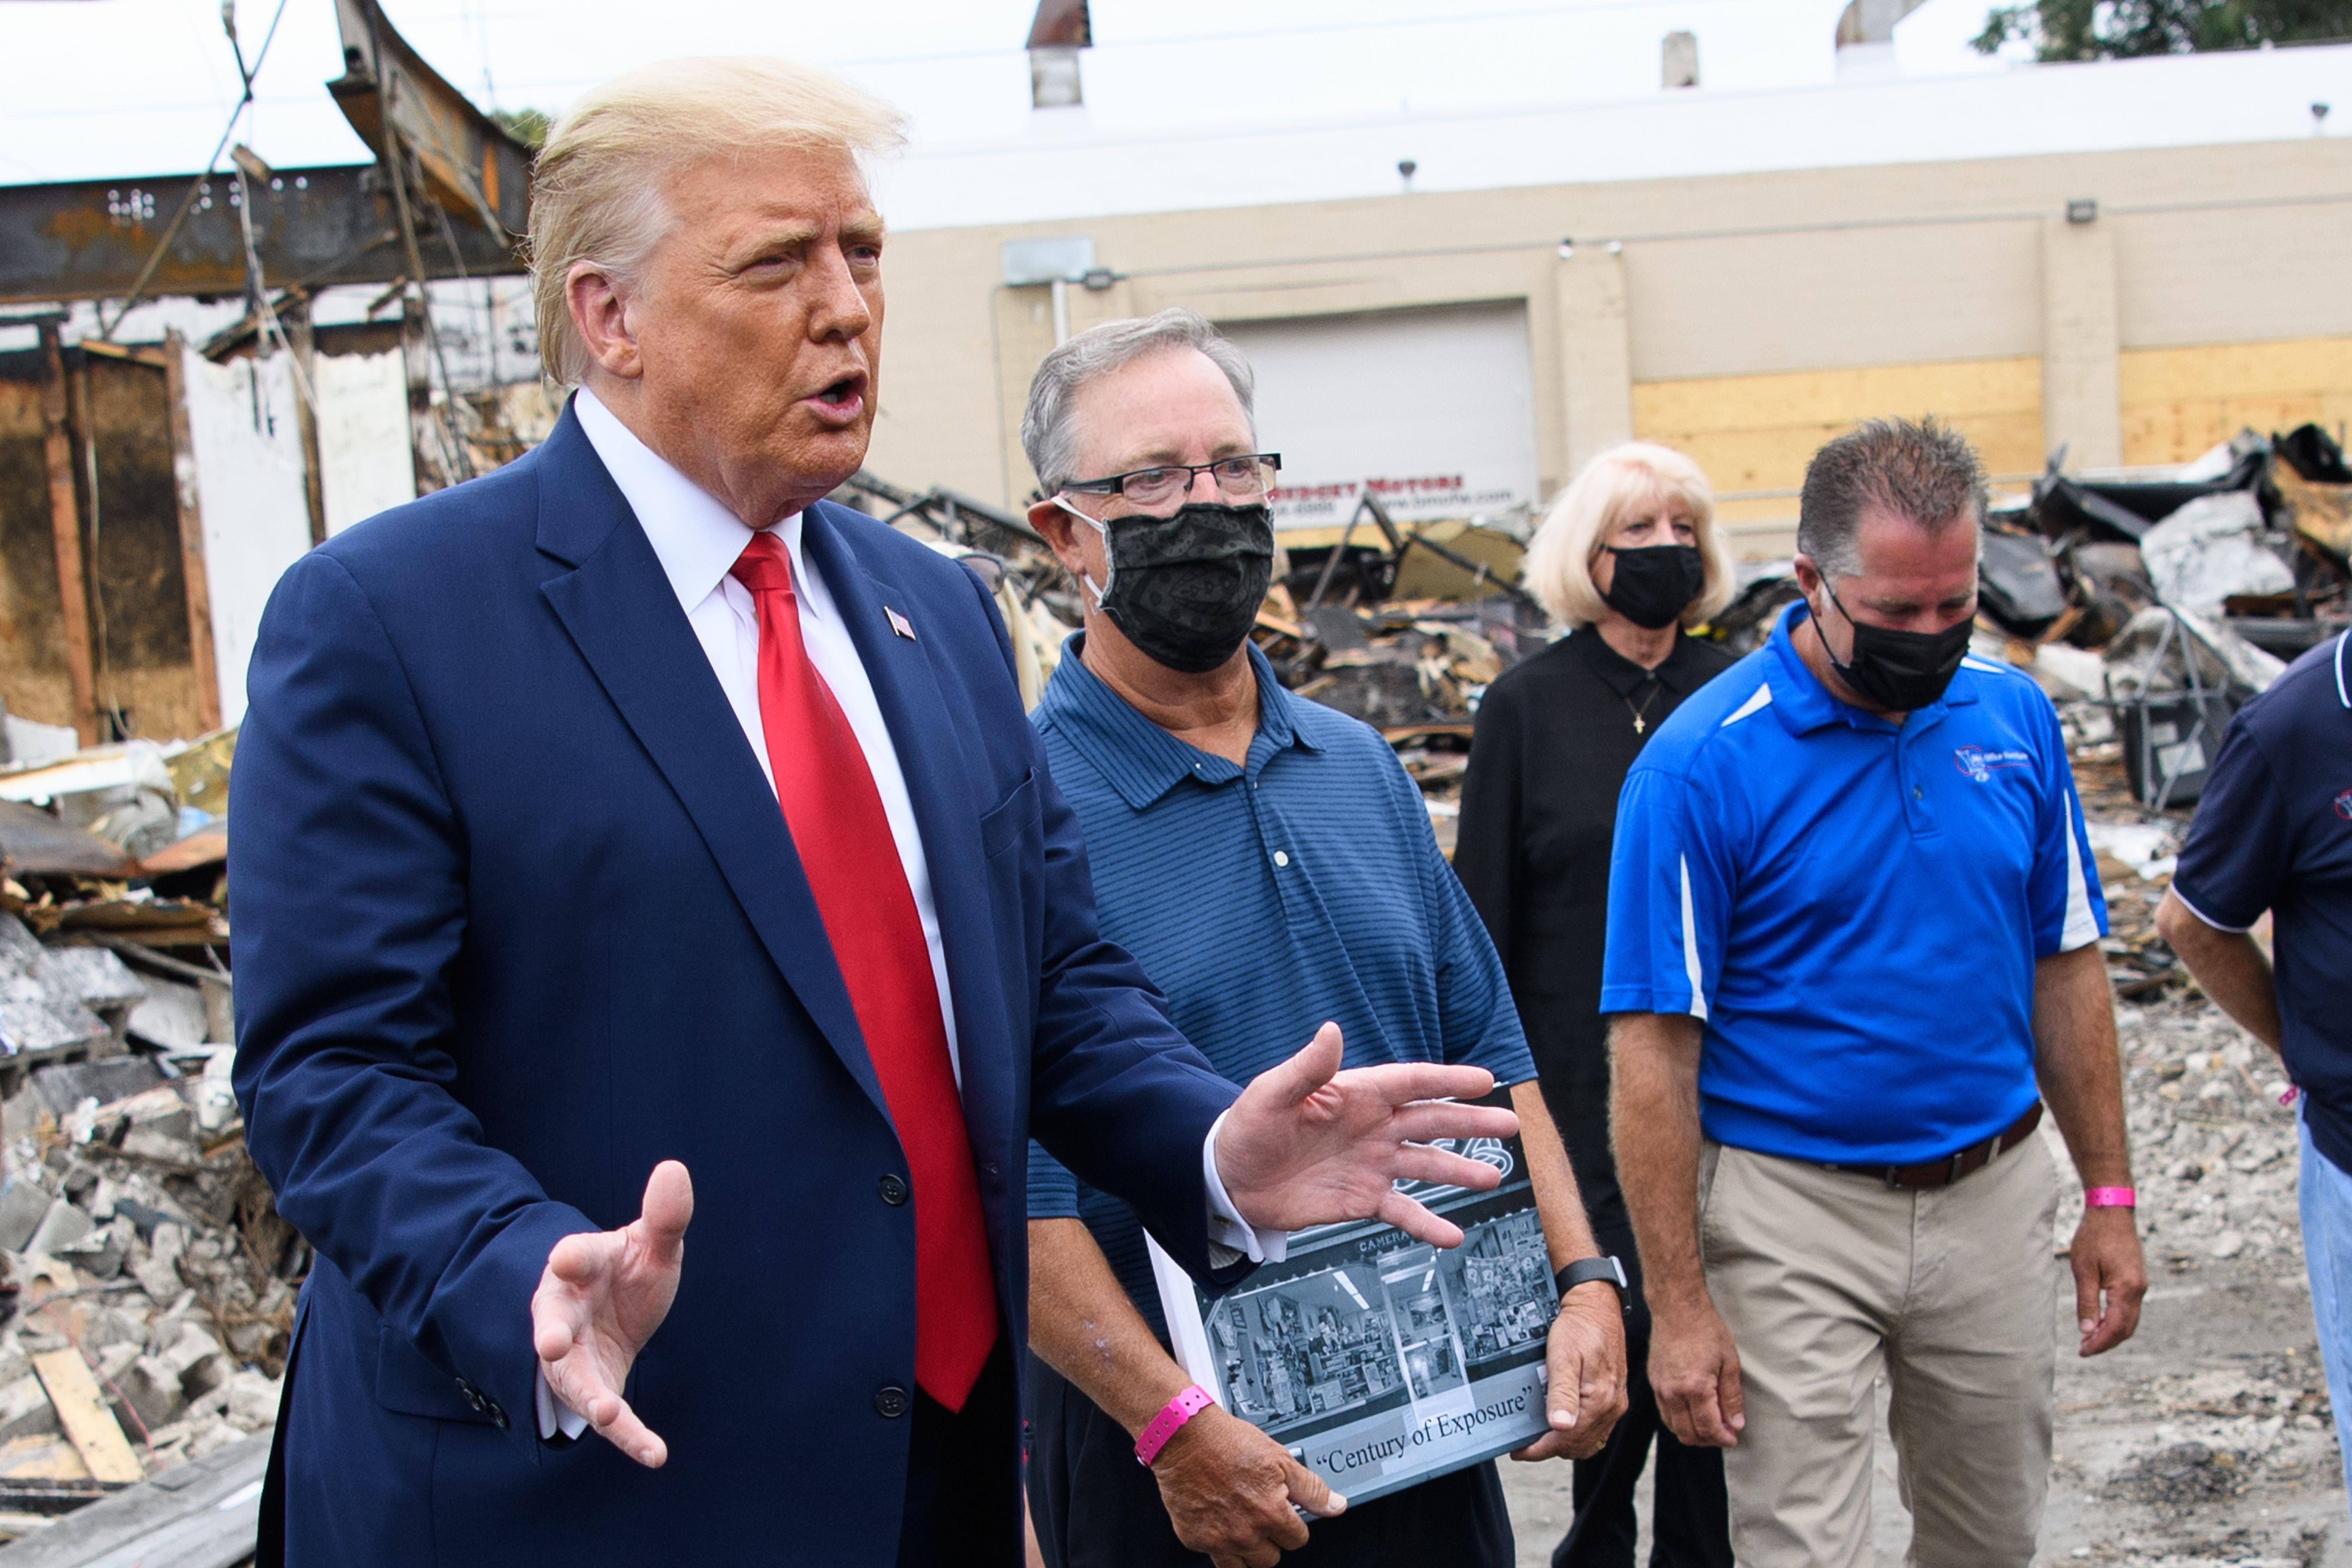 Trump gestures with his hands and speaks while standing amid rubble next to people in face masks.